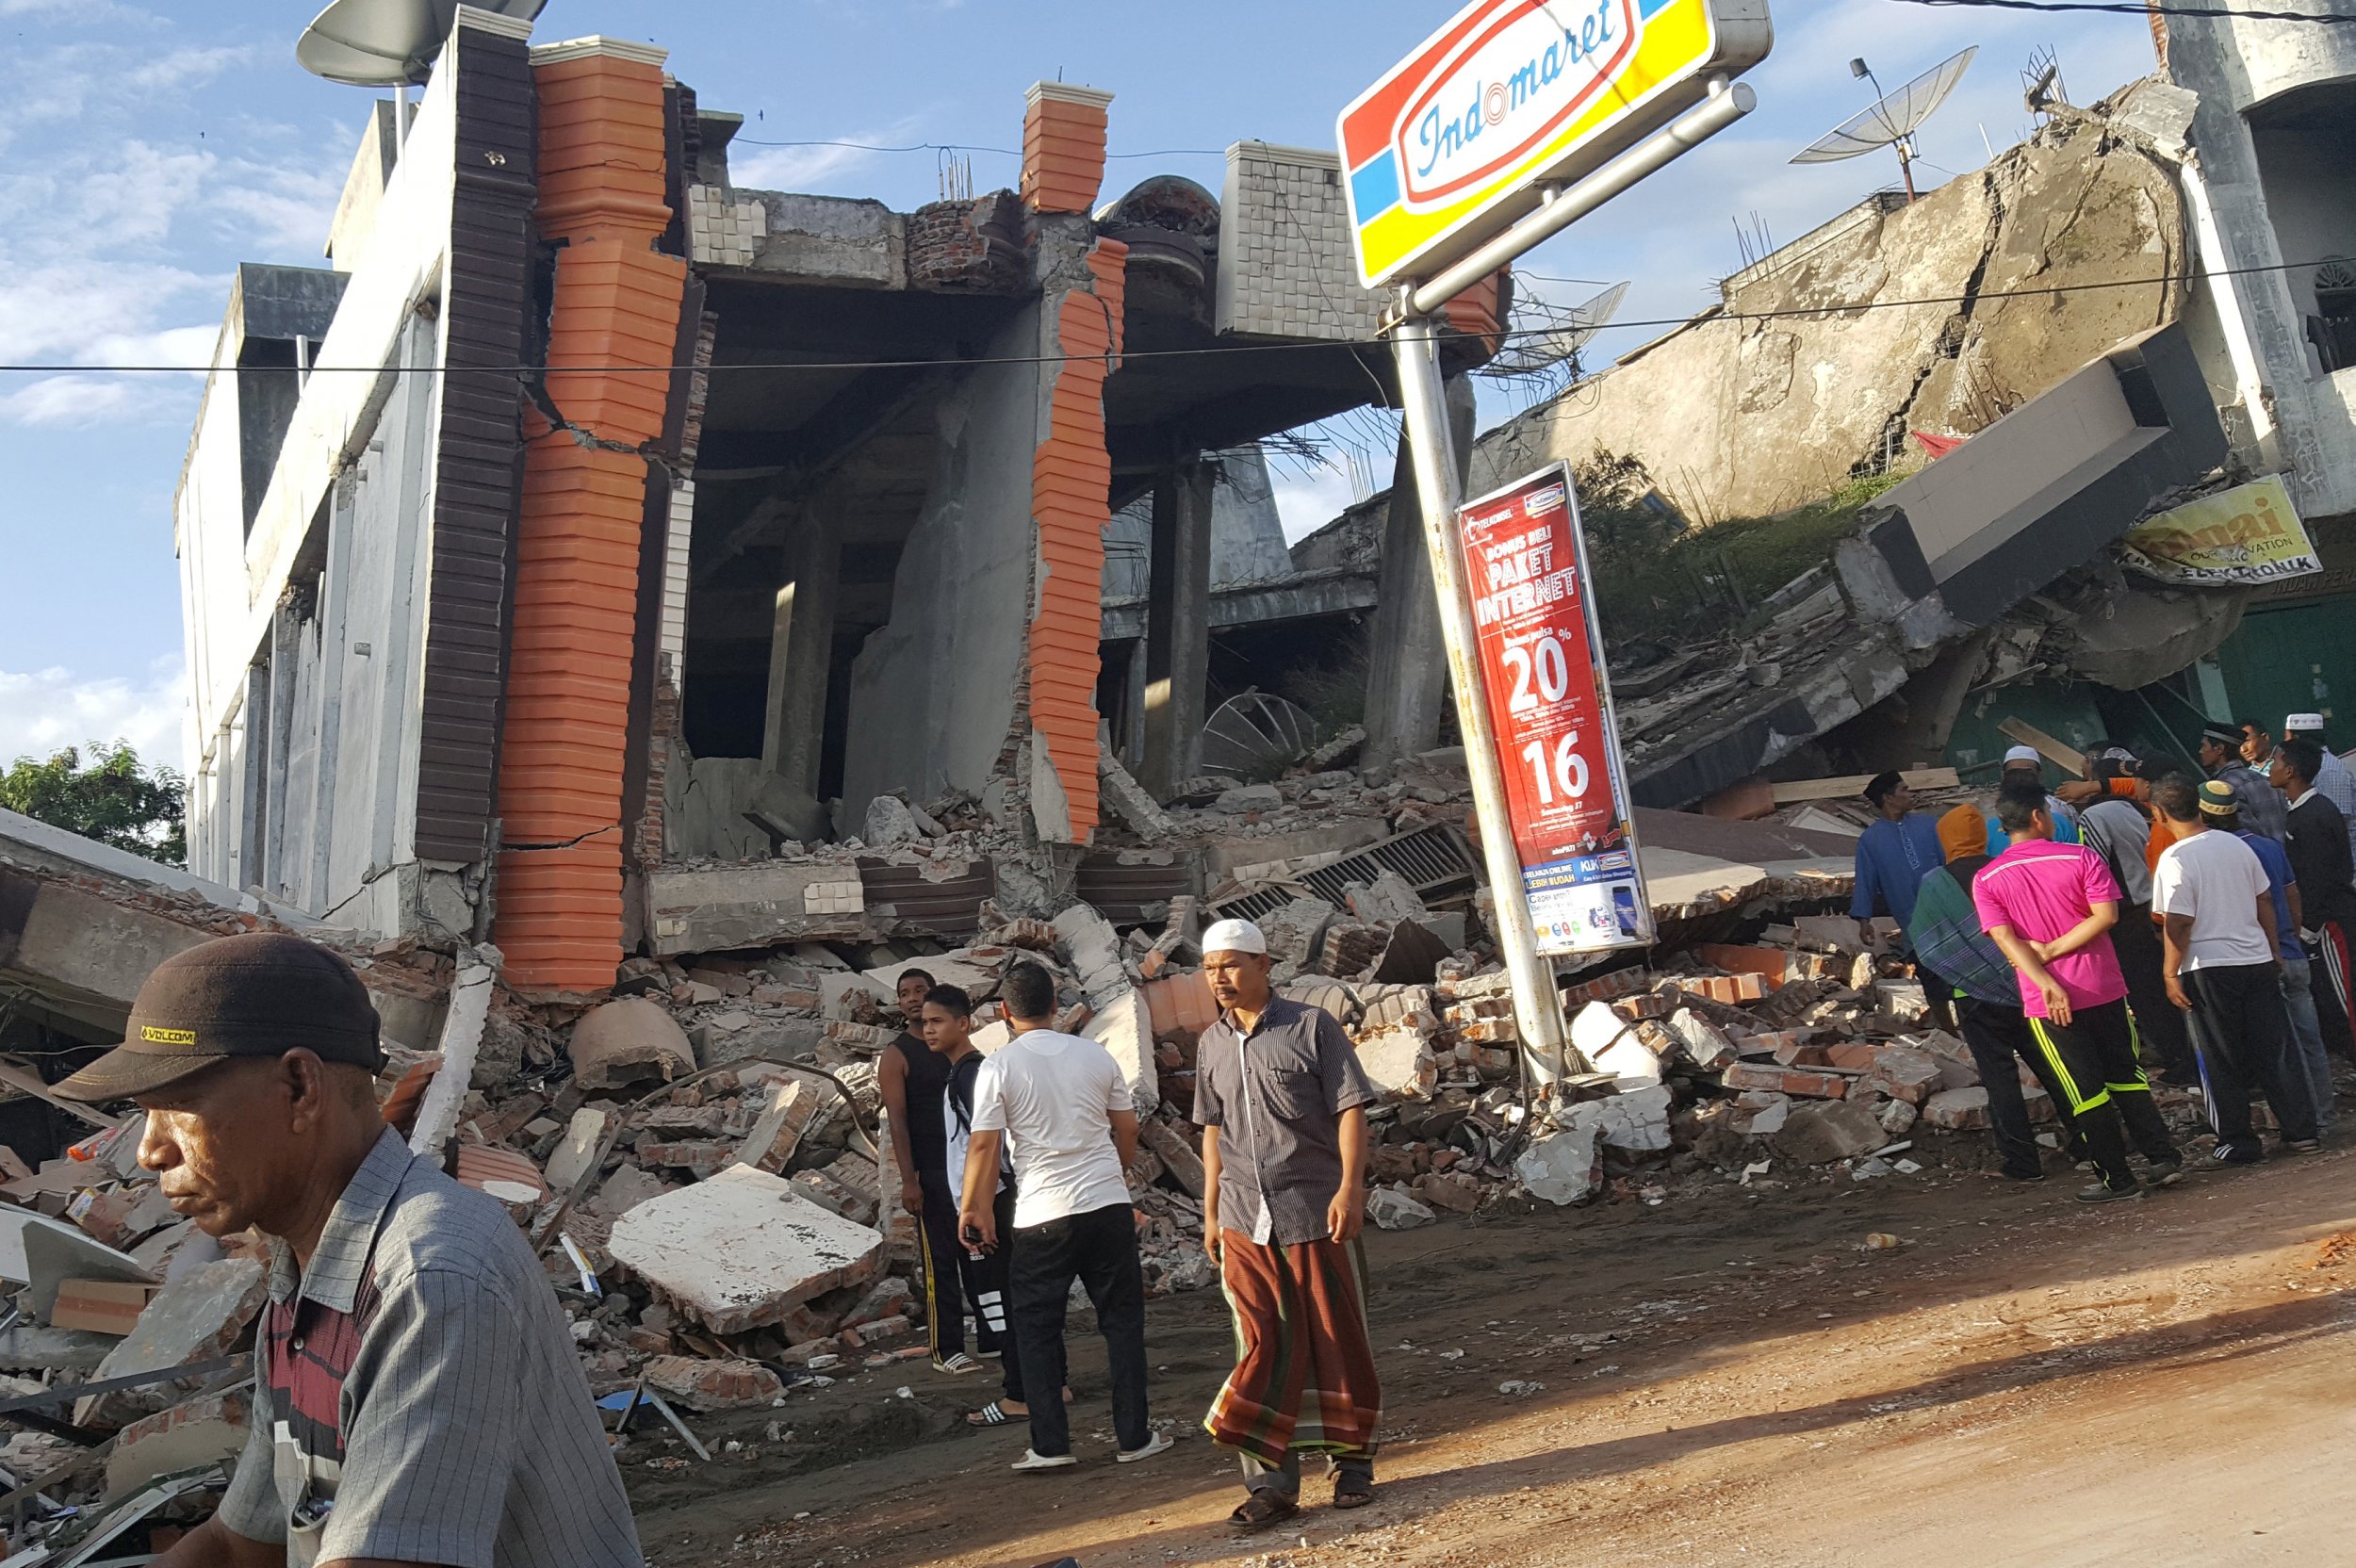  Indonesia  Earthquake  Dozens Killed As Rescuers Search for 